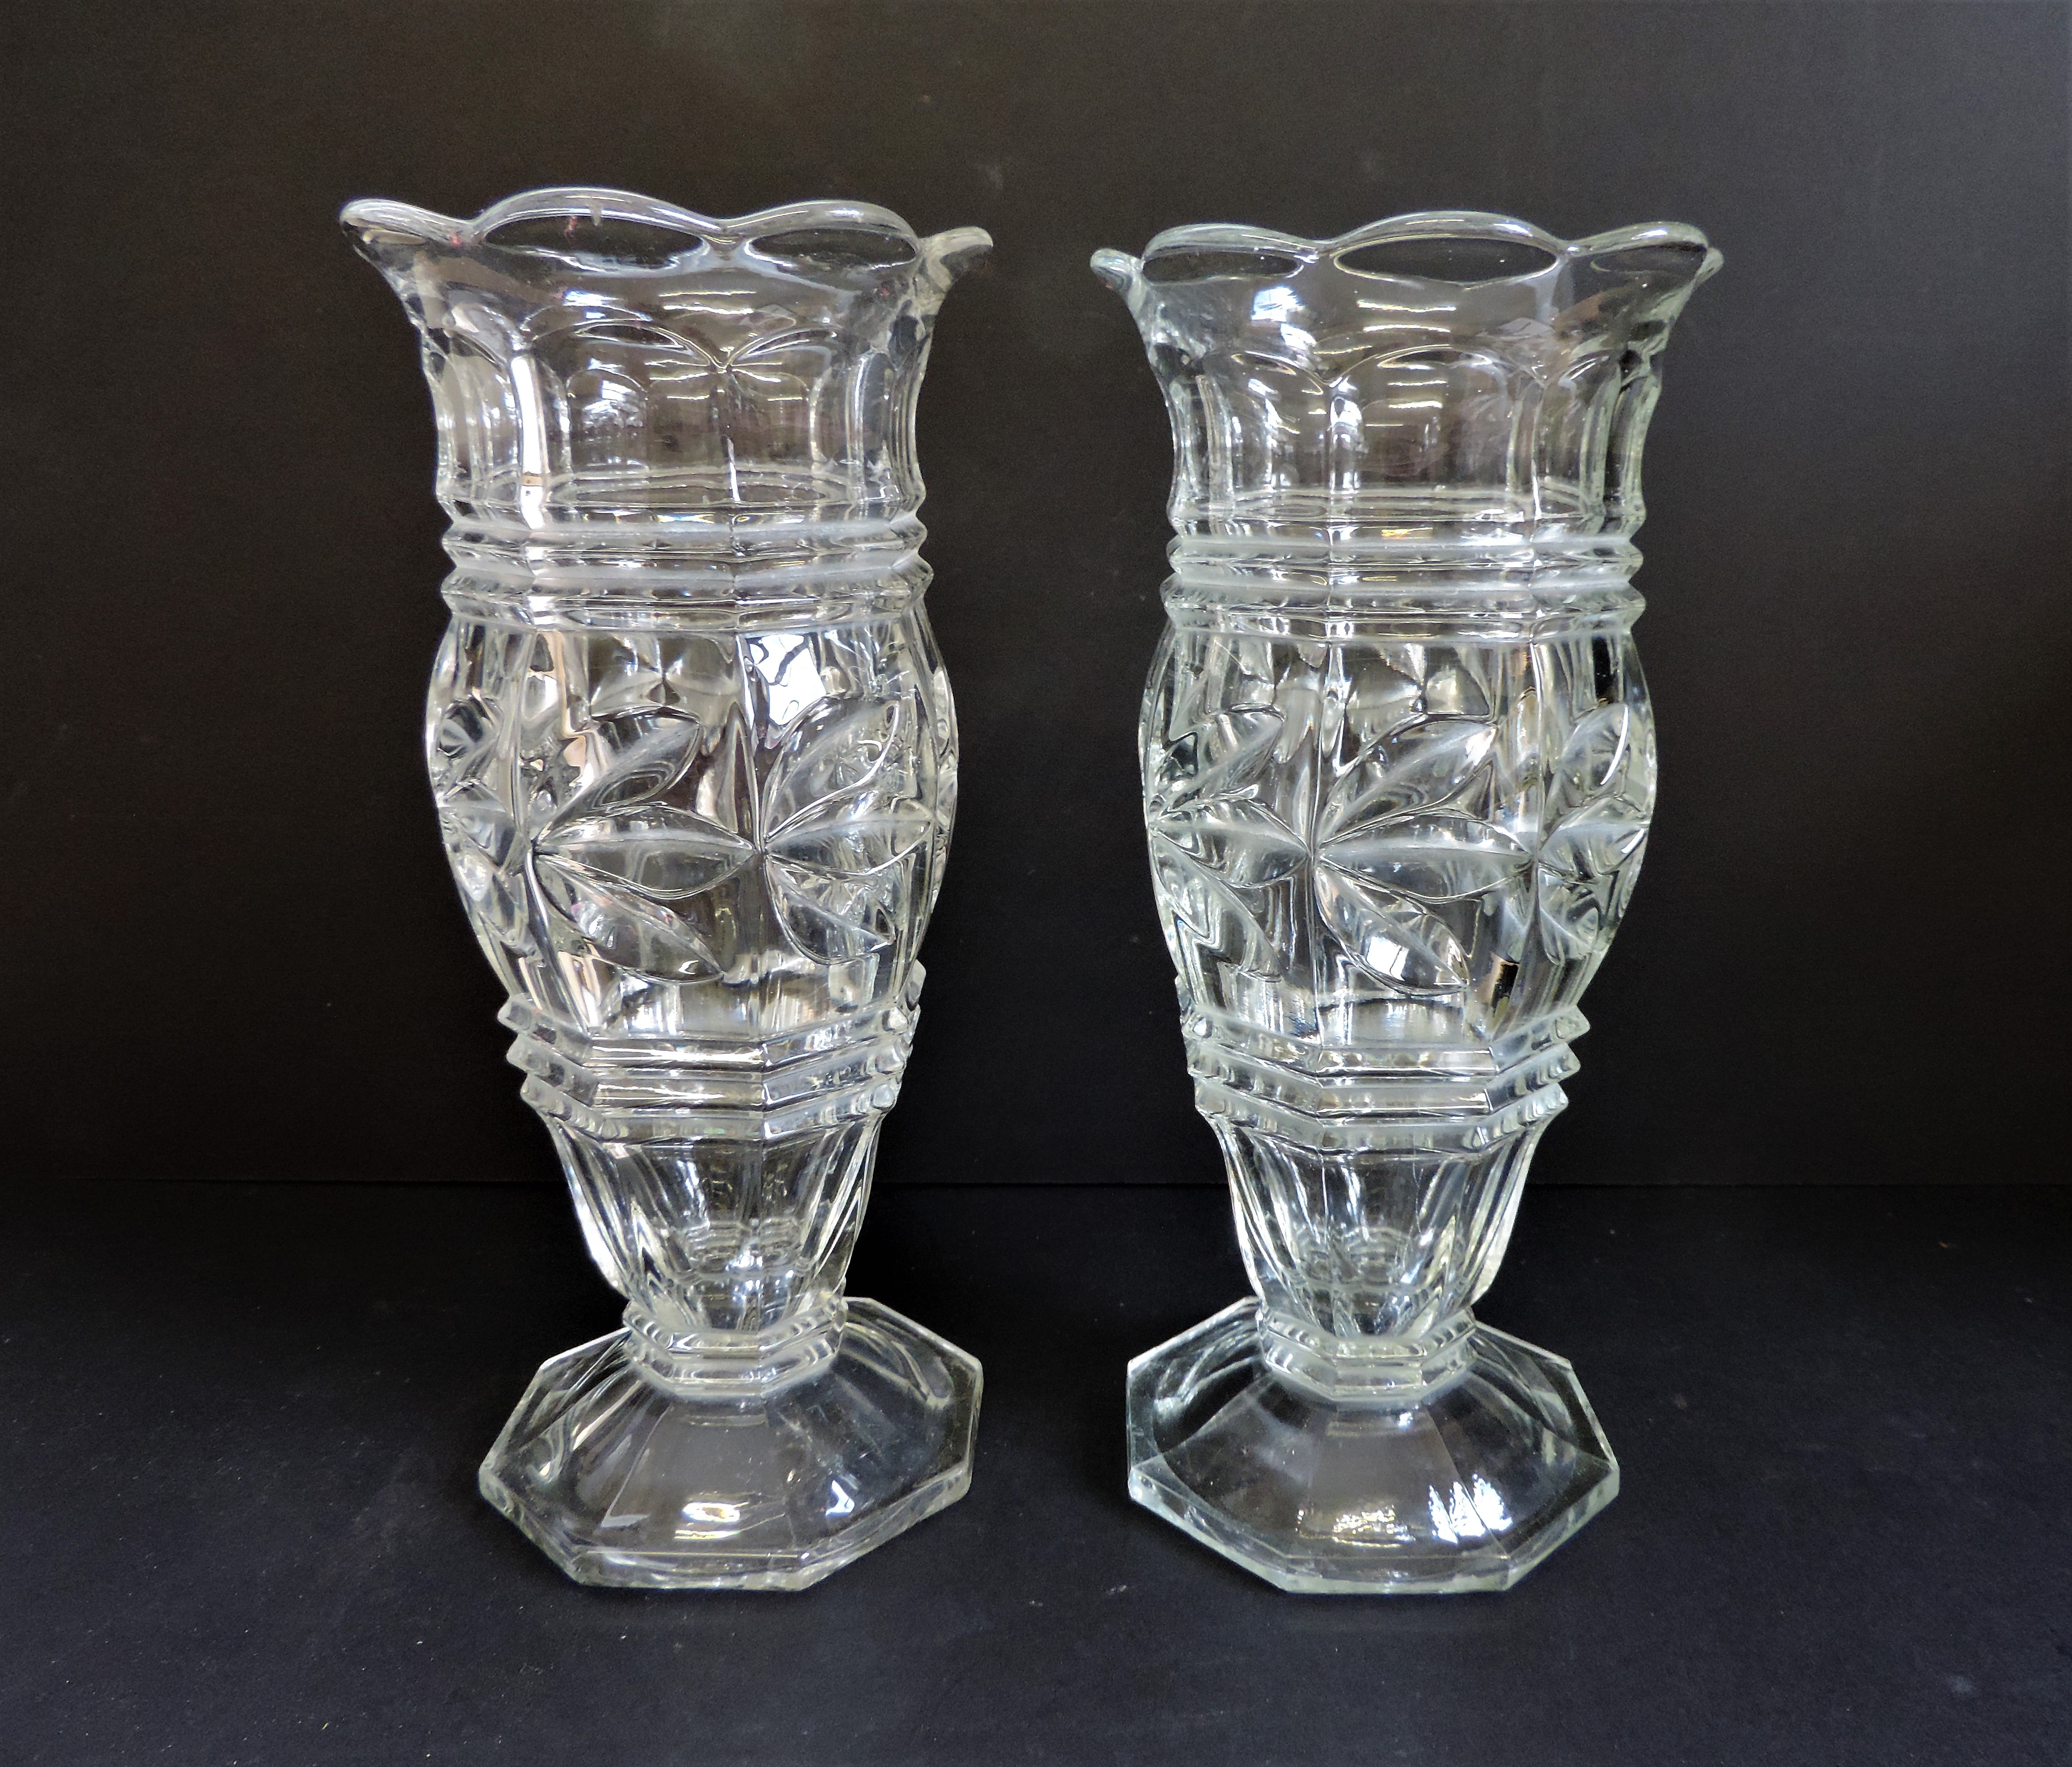 Matching Pair of Art Deco Glass Vases 25cm Tall - Image 2 of 6